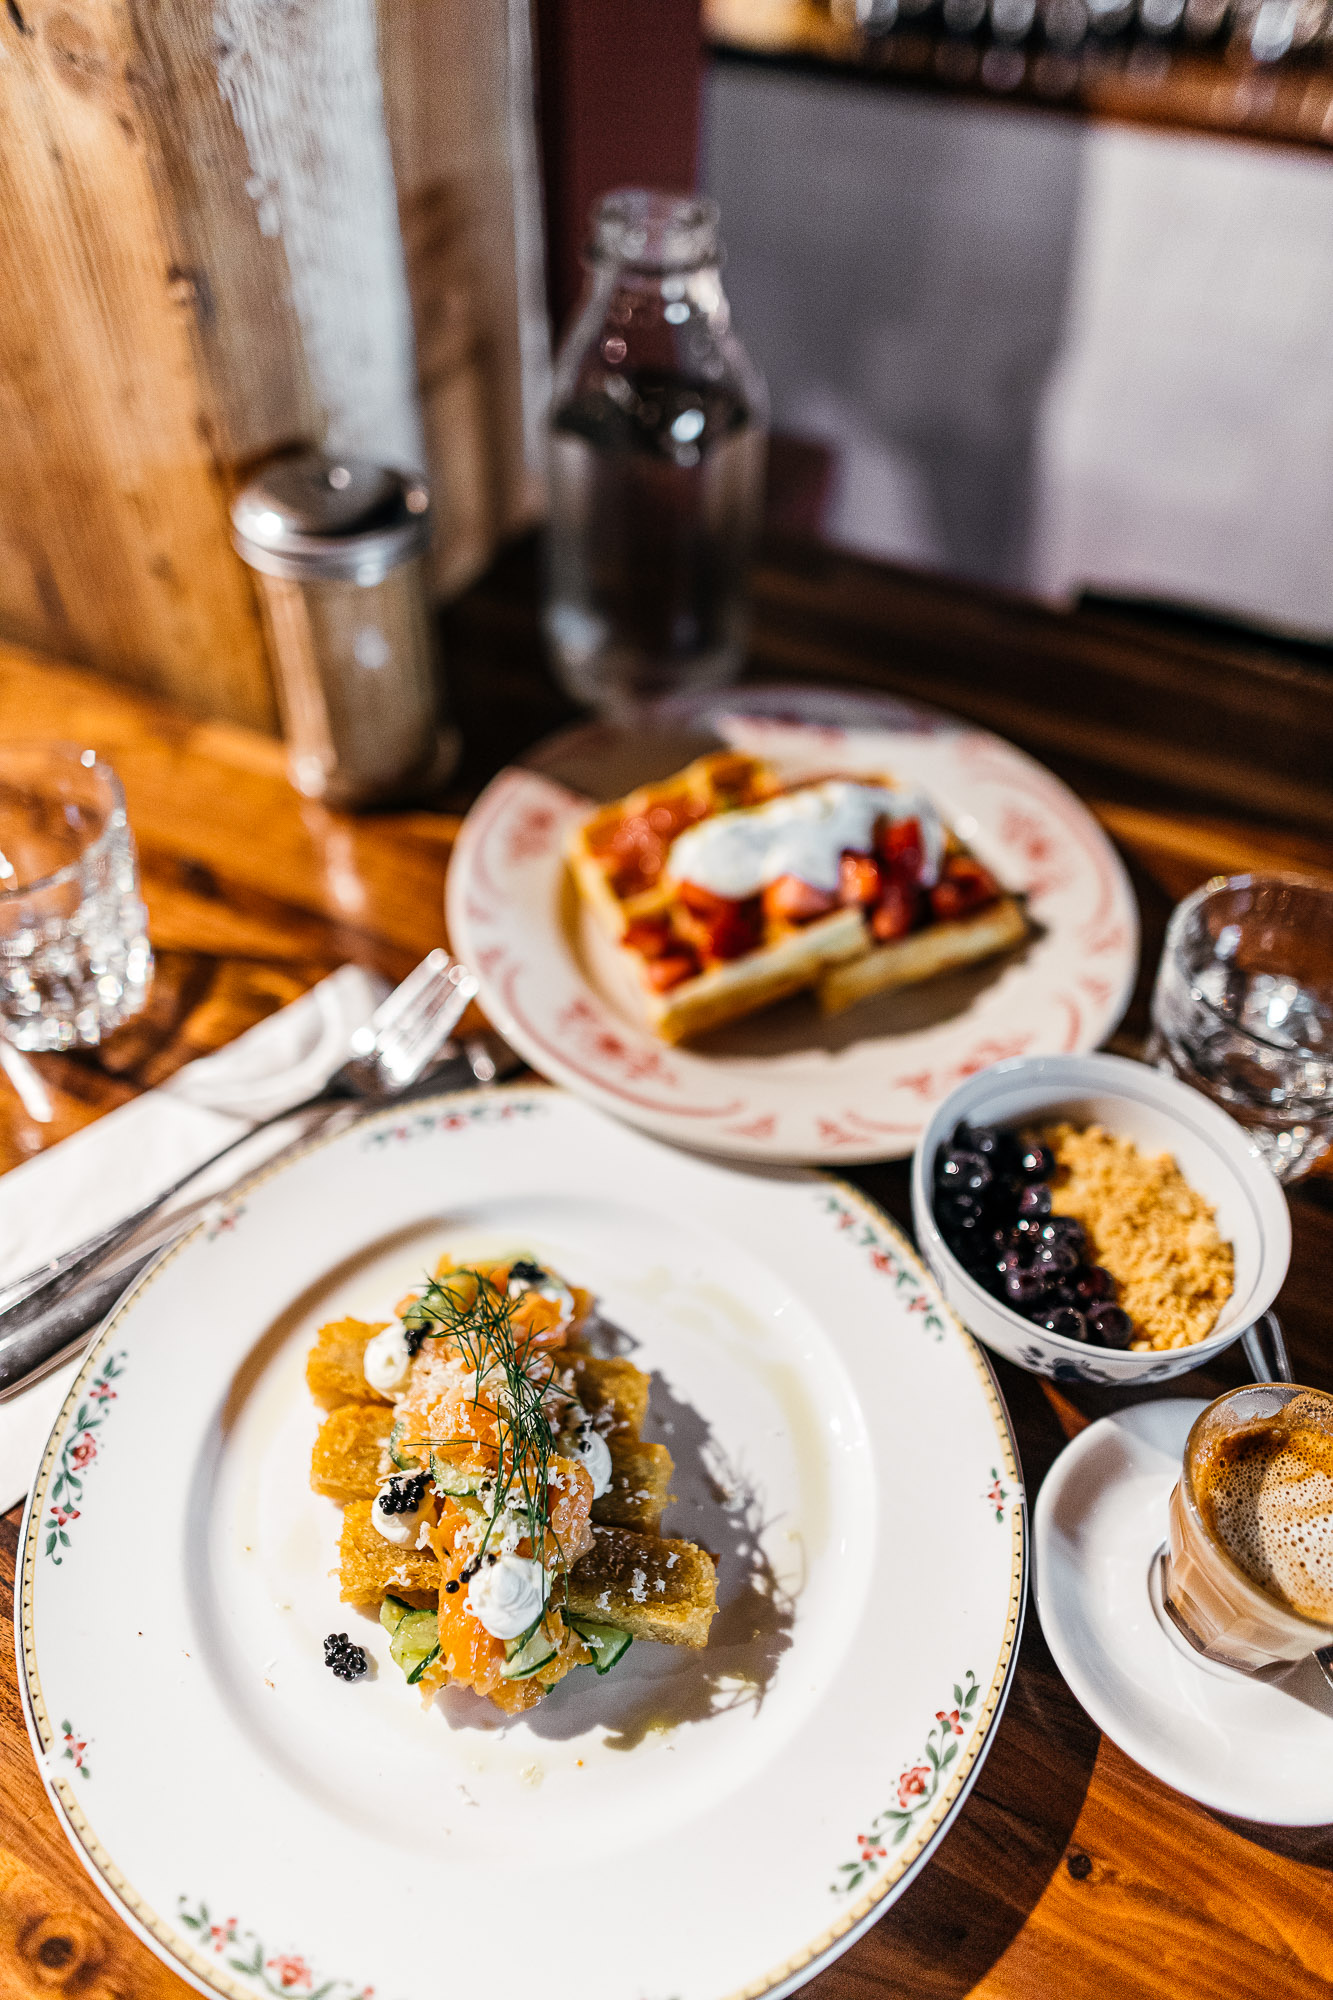 Clementine Café — Brunch — Winnipeg — Manitoba — Jeff Frenette Photography — Jeff On The Road - All photos are under Copyright  © 2019 Jeff Frenette Photography / dezjeff. To use the photos, please contact me at dezjeff@me.com.